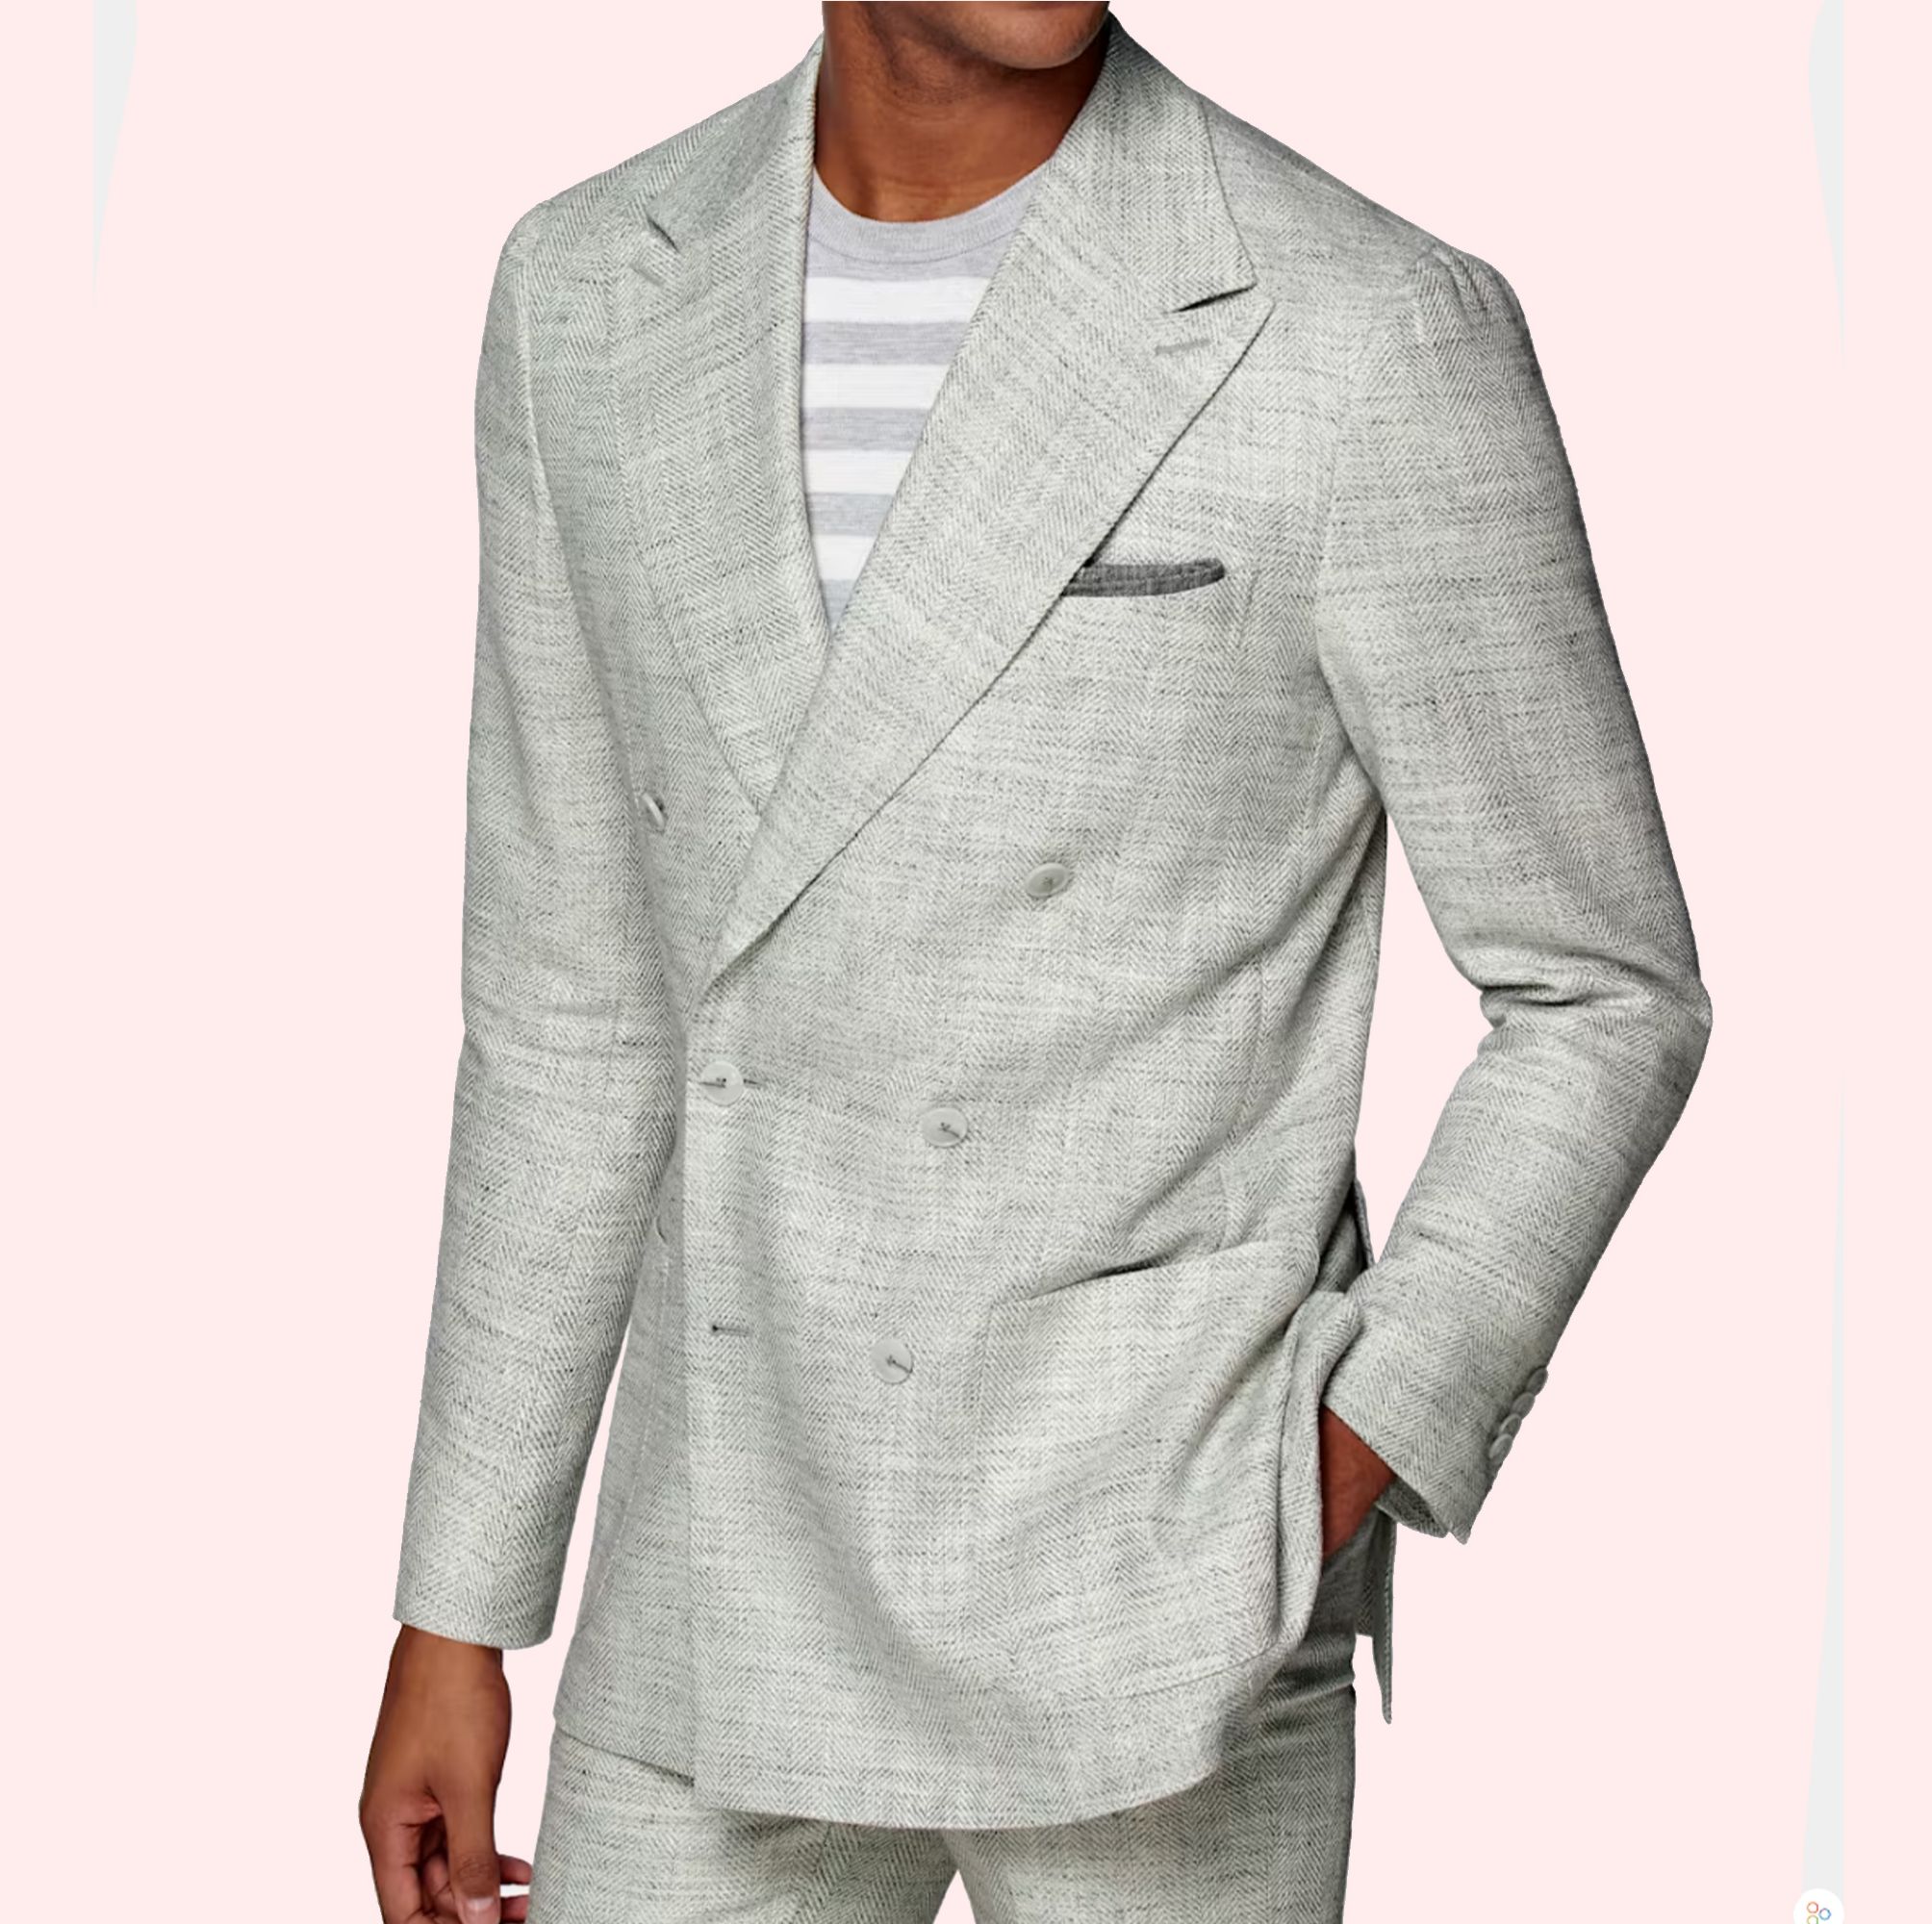 The 15 Best Linen Suits to Keep You Cool Under the Sun